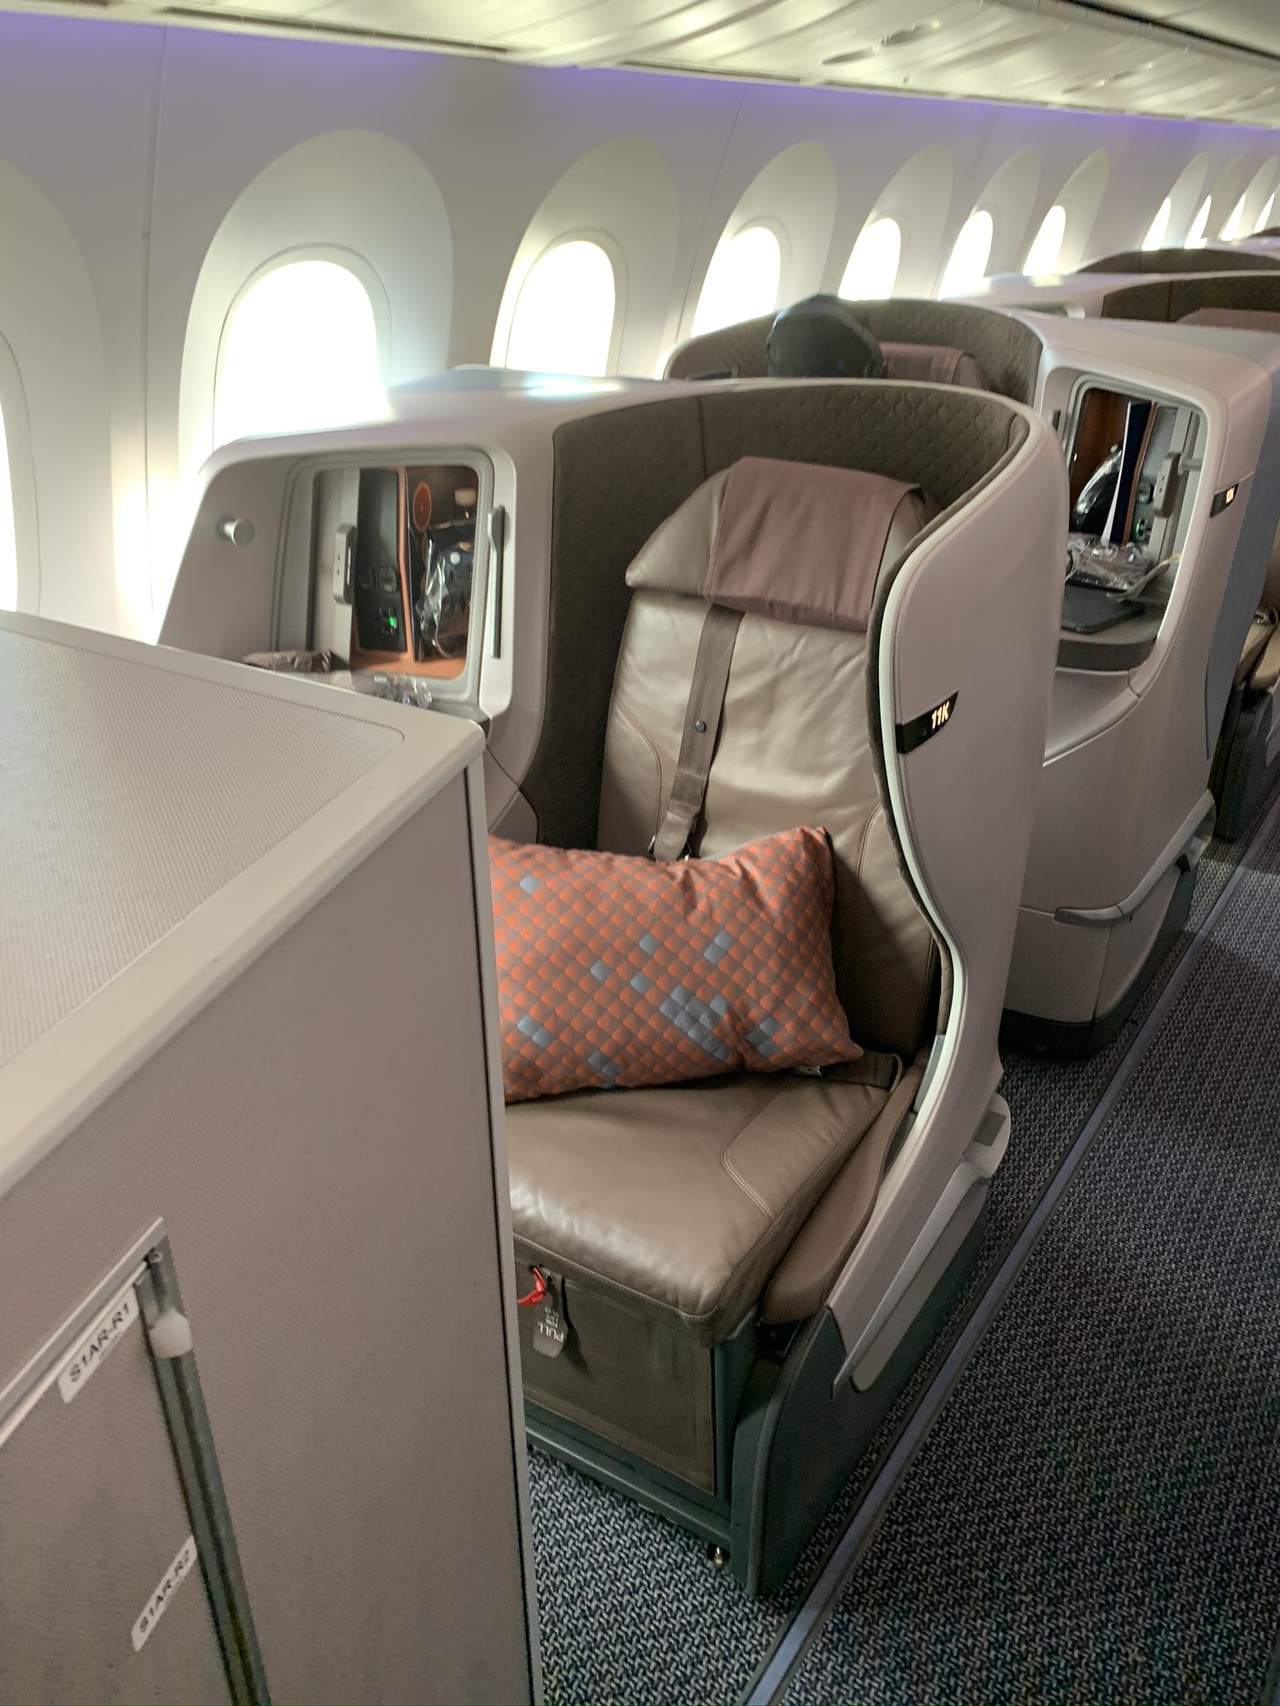 Review of Singapore Airlines flight from Osaka to Singapore in Business